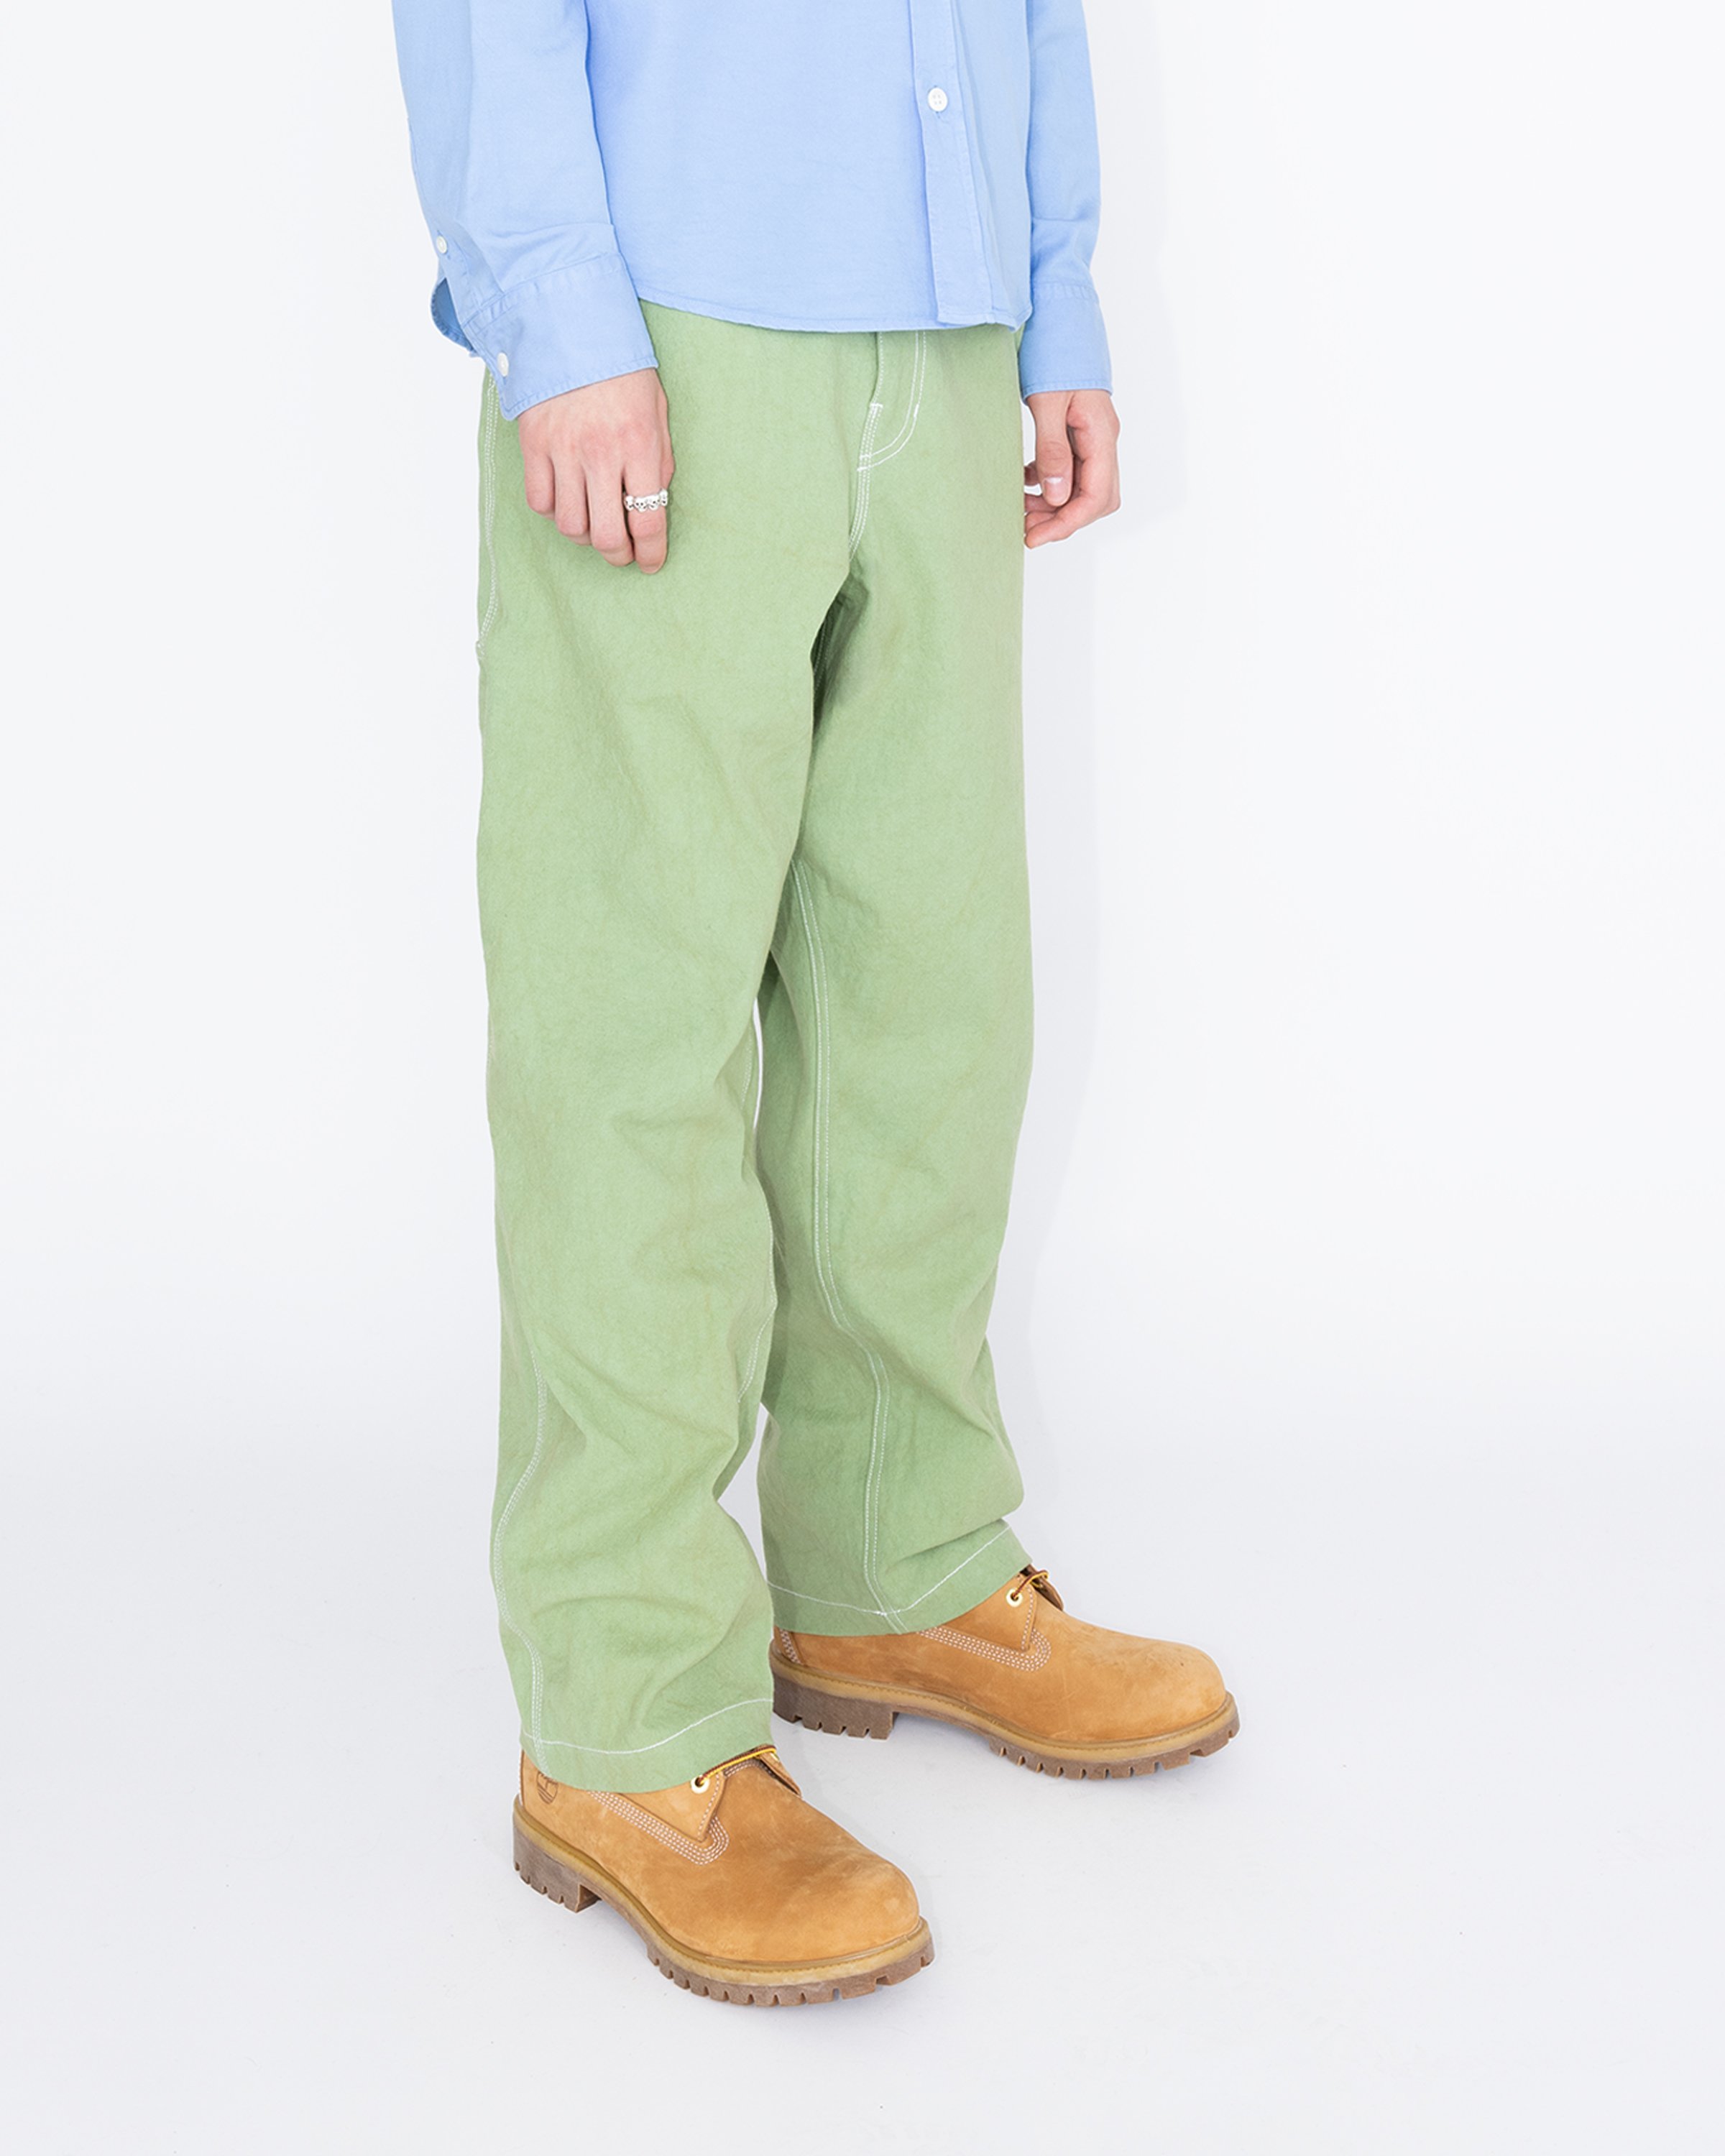 Highsnobiety HS05 - Sun Dried Canvas Carpenter Pants Green - Clothing - Green - Image 3